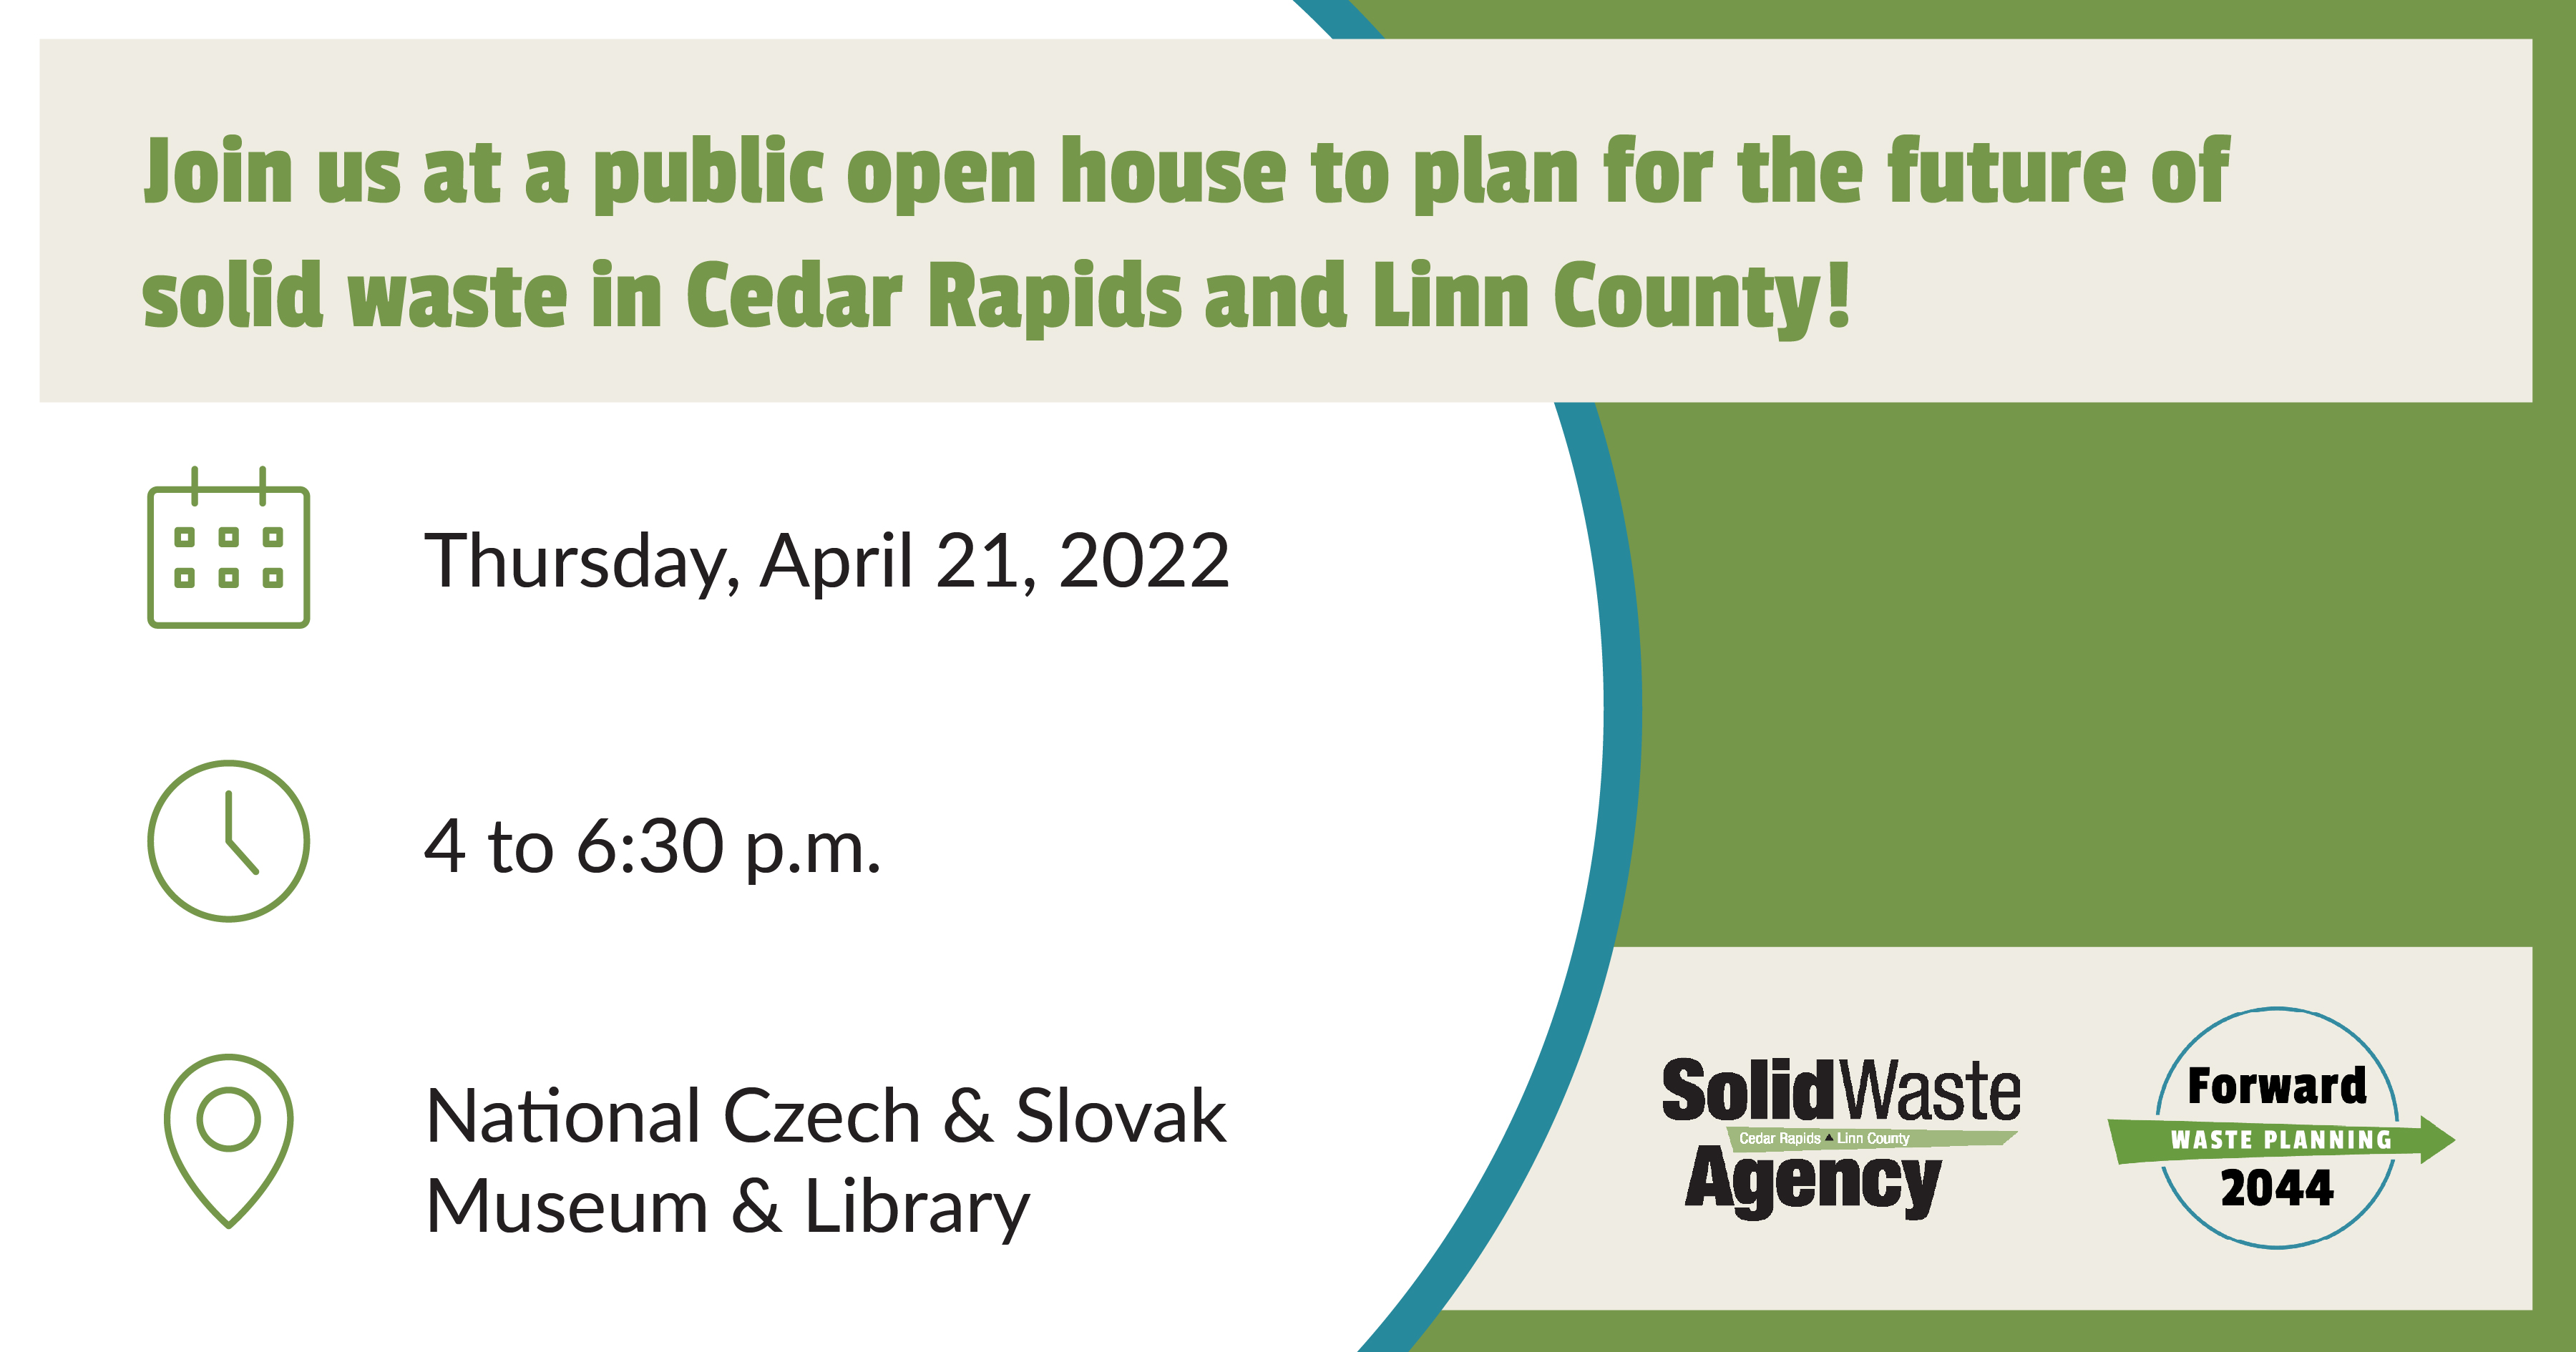 Solid Waste Agency to Hold Public Open House to Educate Linn County Residents on Potential Future of